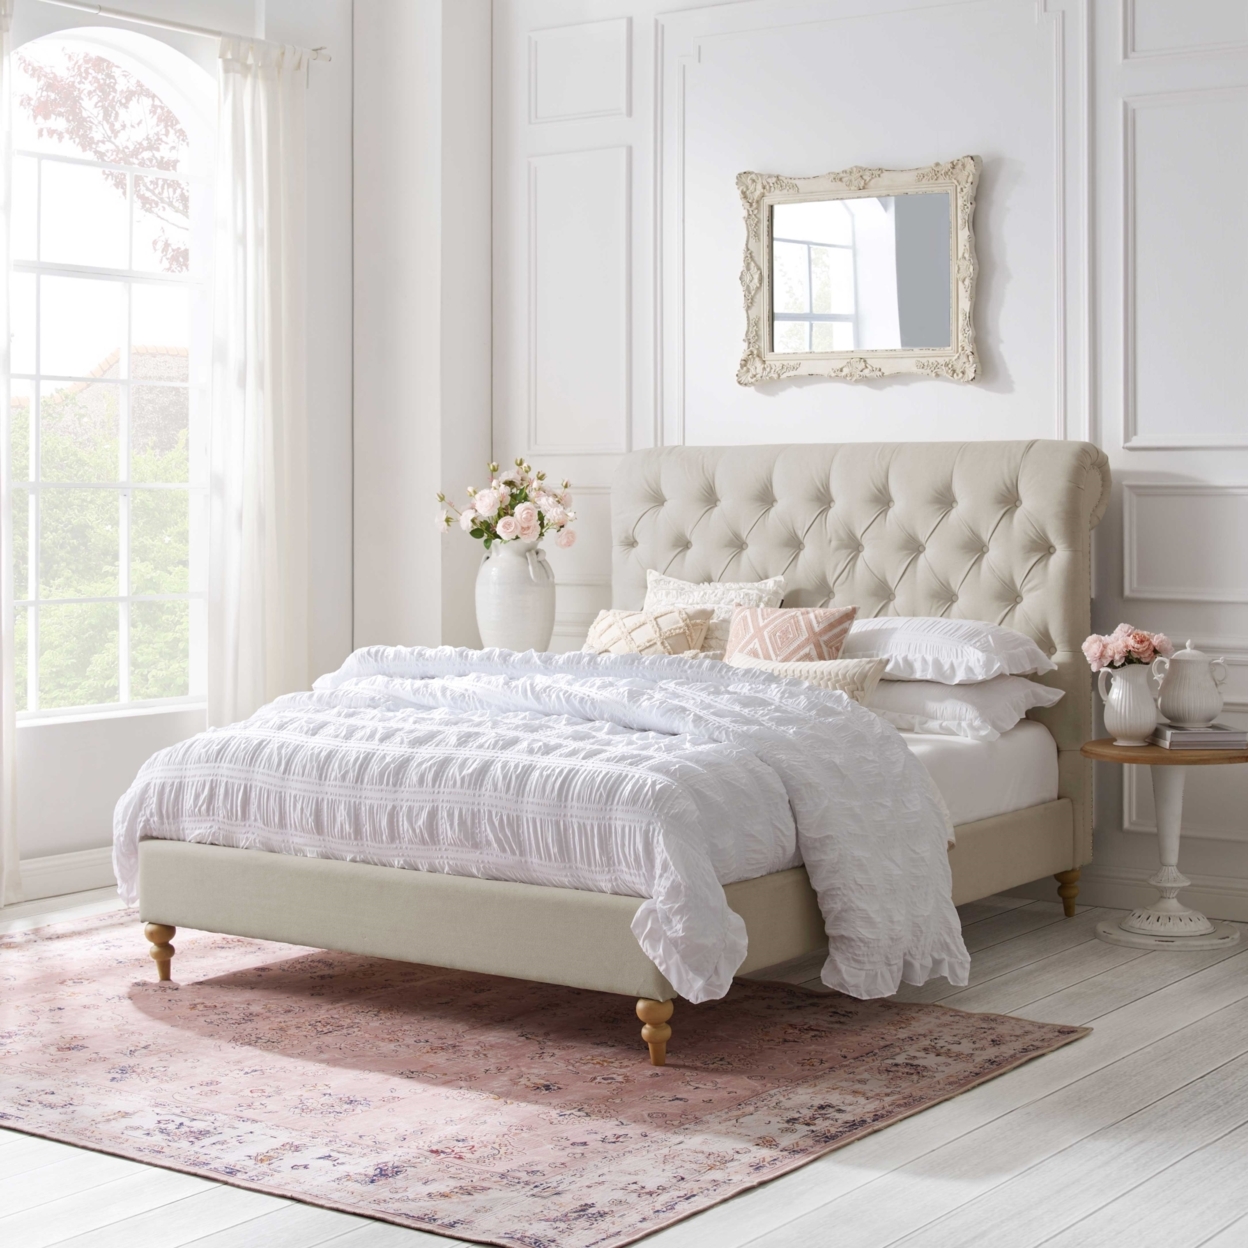 Kailynn Bed-Rolled Top Button Tufted-Nailhead Trim-Slats Included - Cream White, King